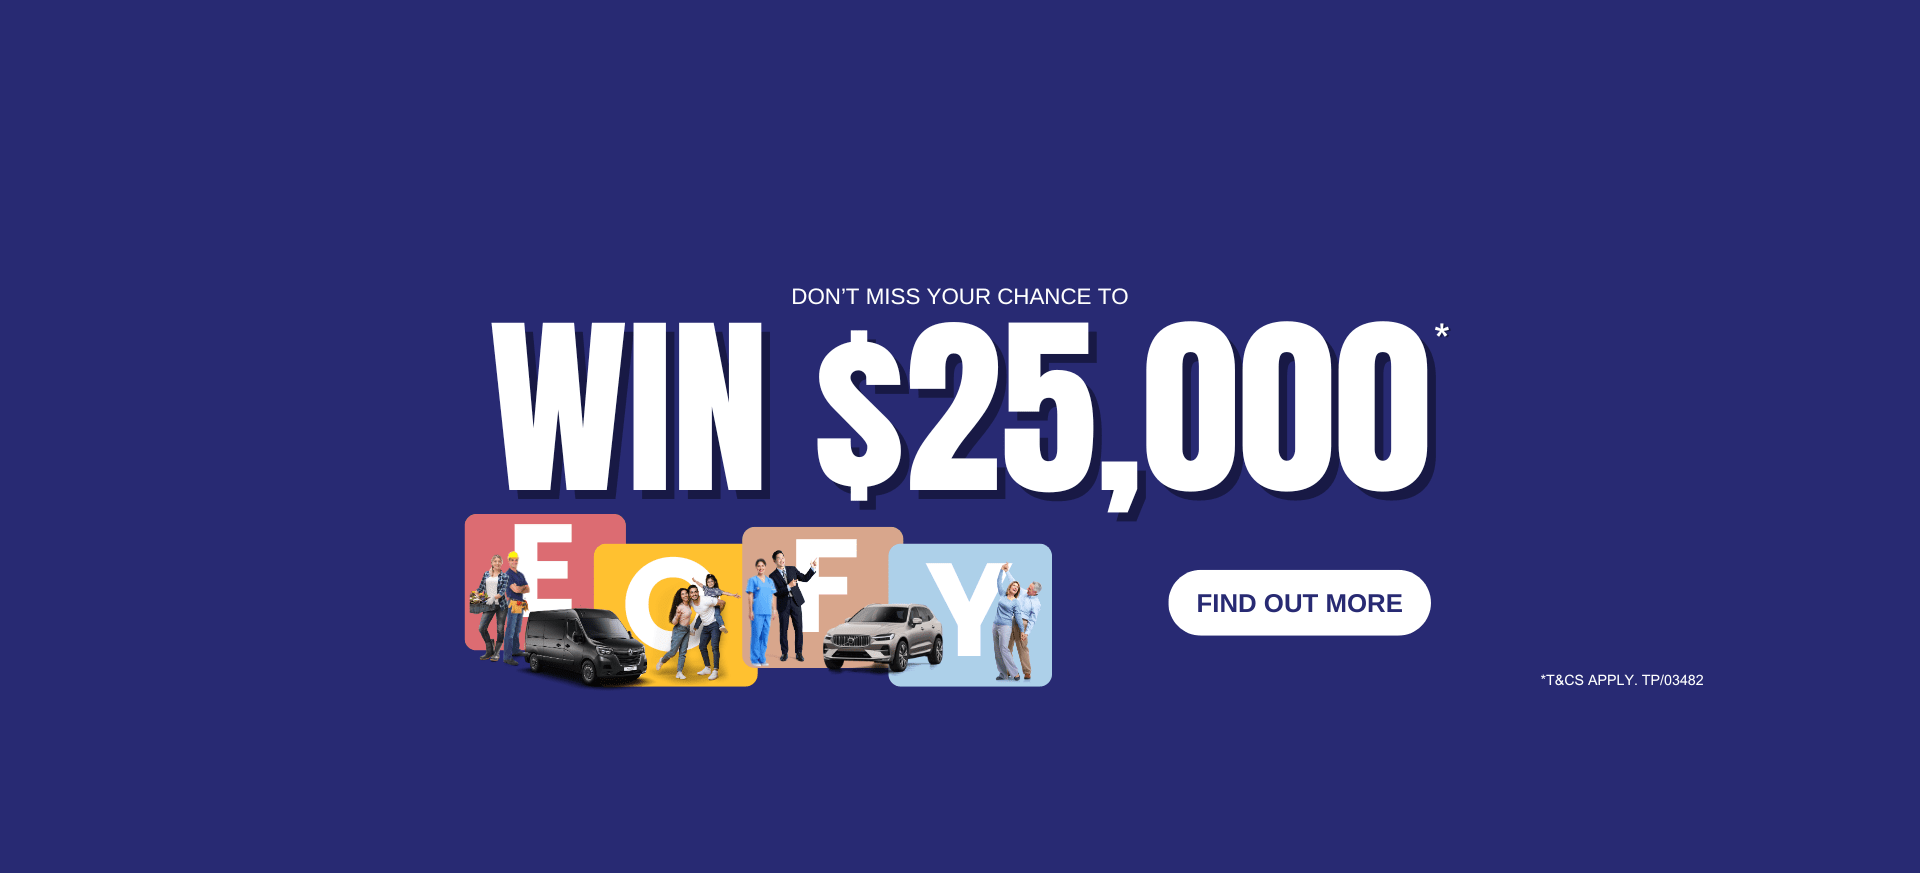 Don't Miss Your Chance to Win $25,000*